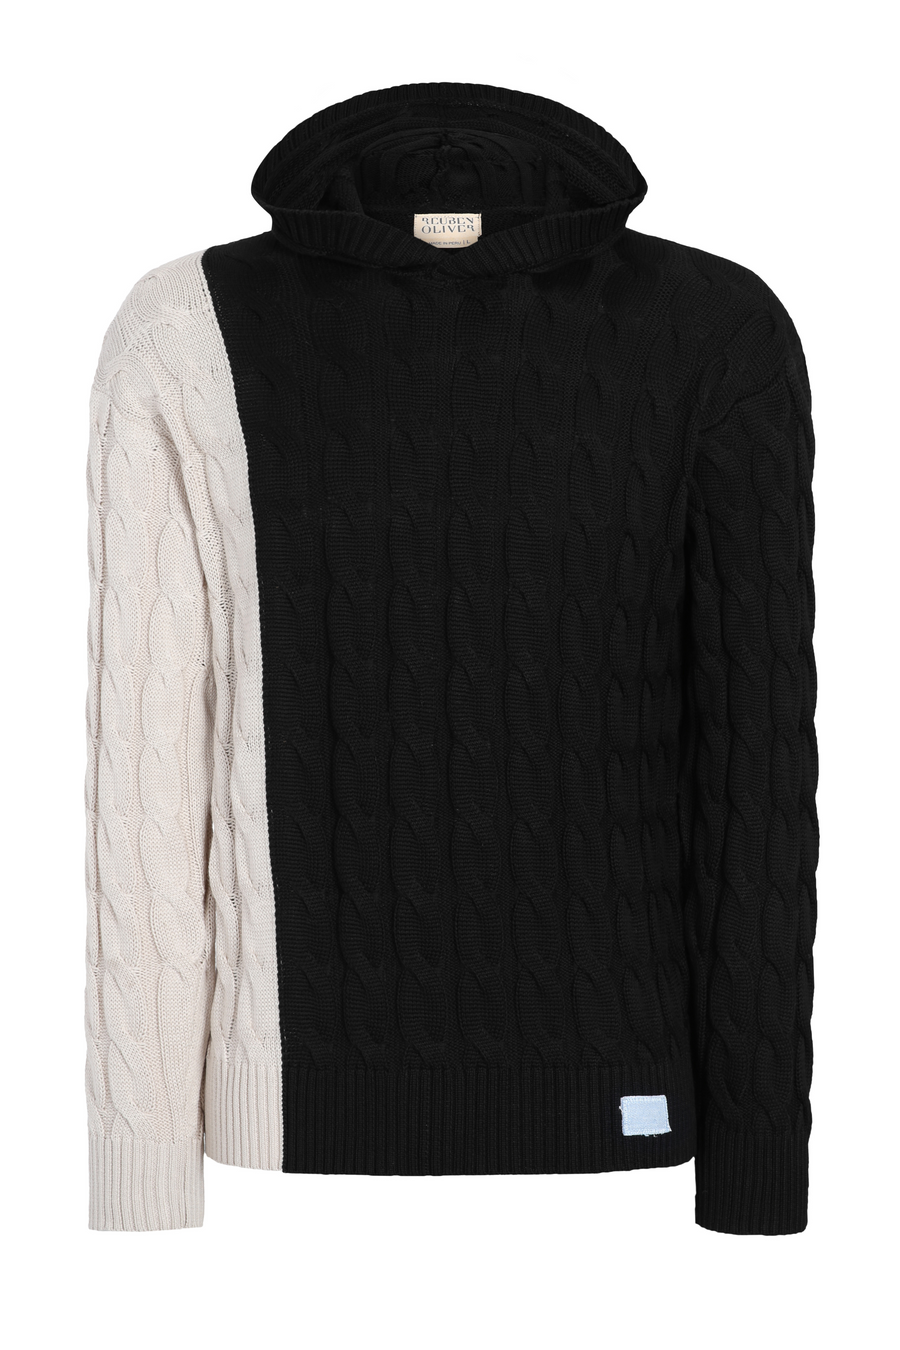 Two-Toned Cable Knit Hoodie Reuben Oliver